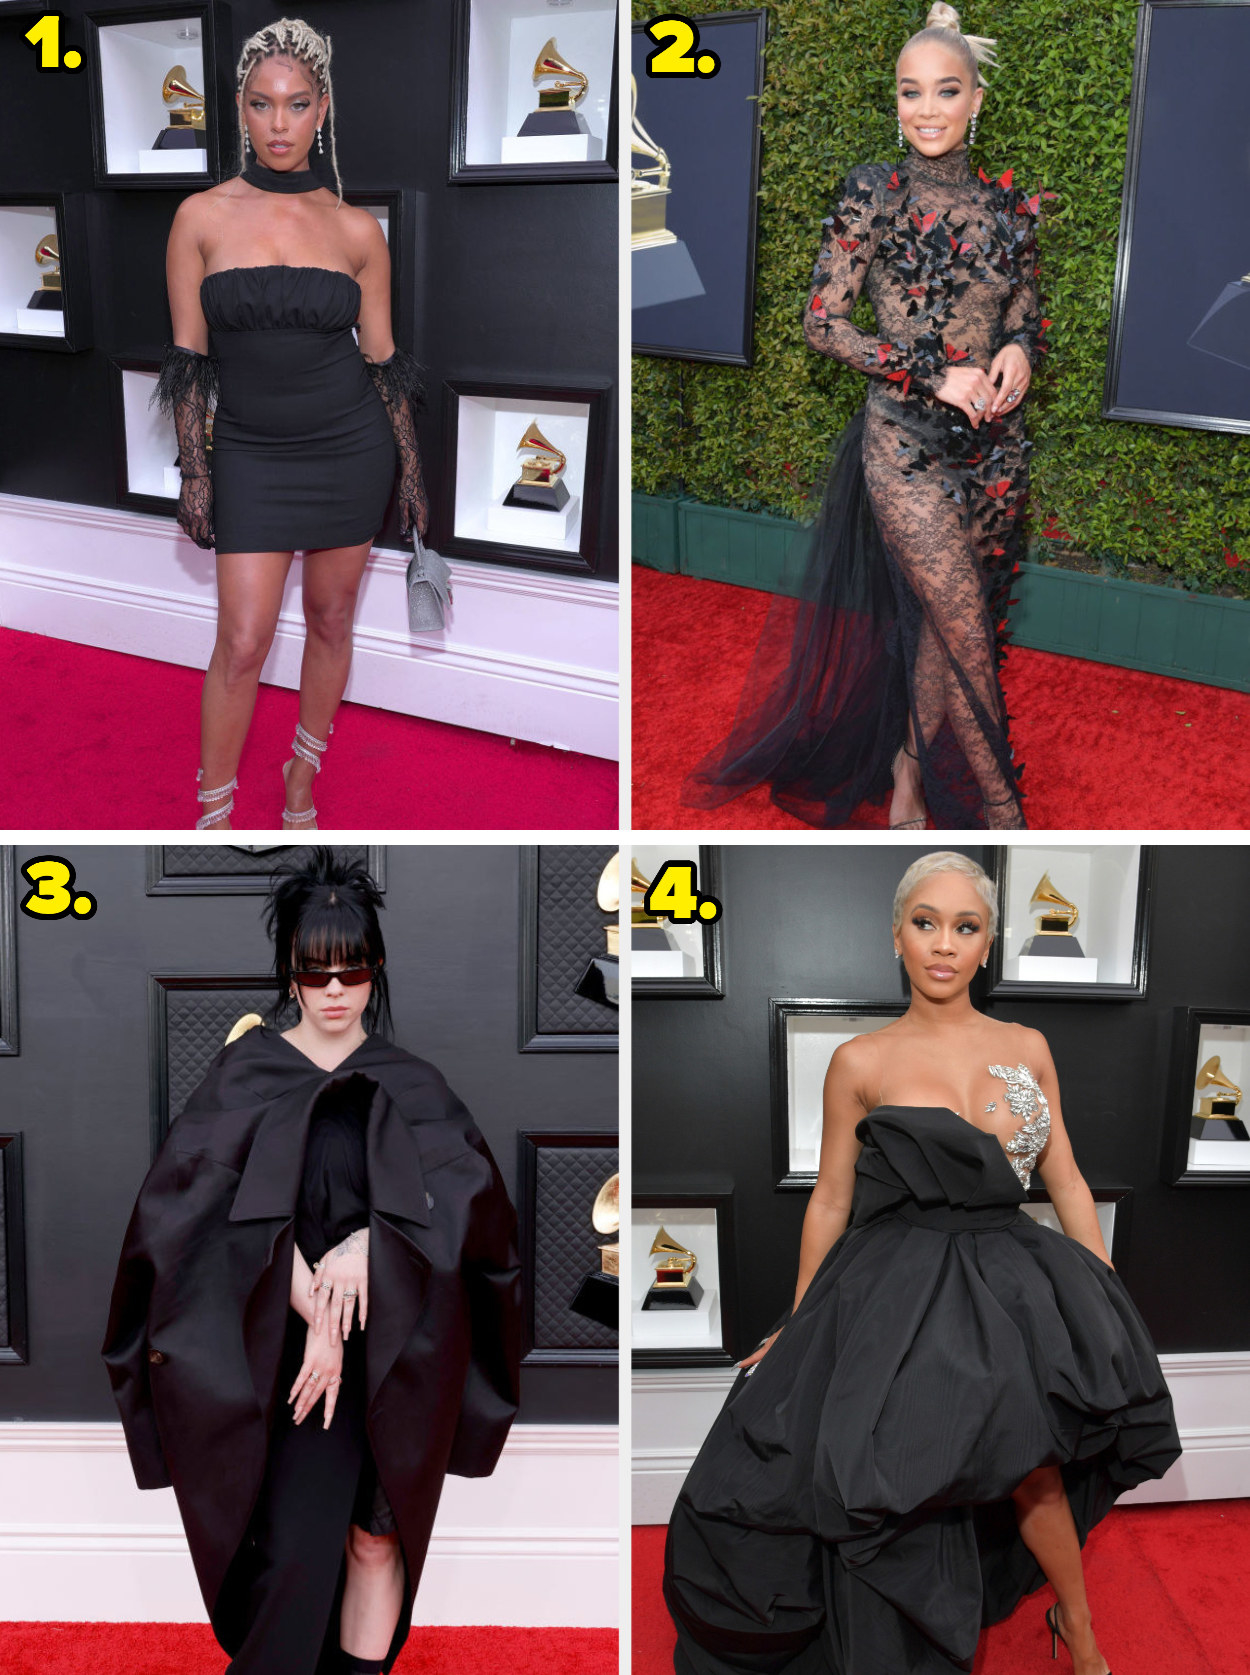 1. A strapless minidress with sheer printed gloves. 2. A sheer gown with a poofy train and flower appliqués all over. 3. A short dress with a giant cape. 4. A poofy asymmetrical gown with a metal flower appliqué covering one breast.